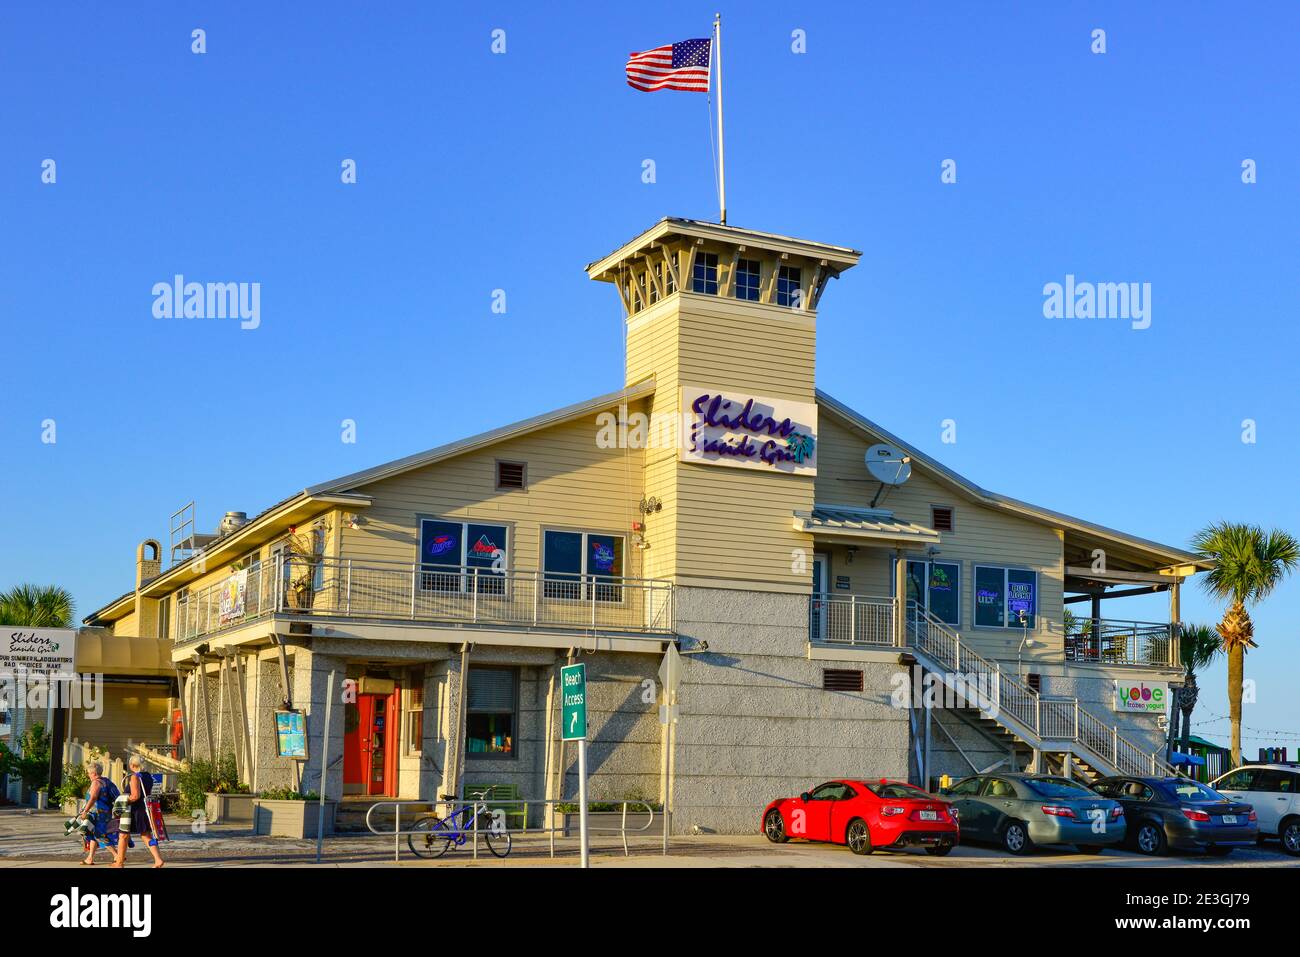 A coastal style commercial building housing the 'Sliders Seaside Grill' restaurant nearing sunset at Fernandina Beach on Amelia Island, FL Stock Photo